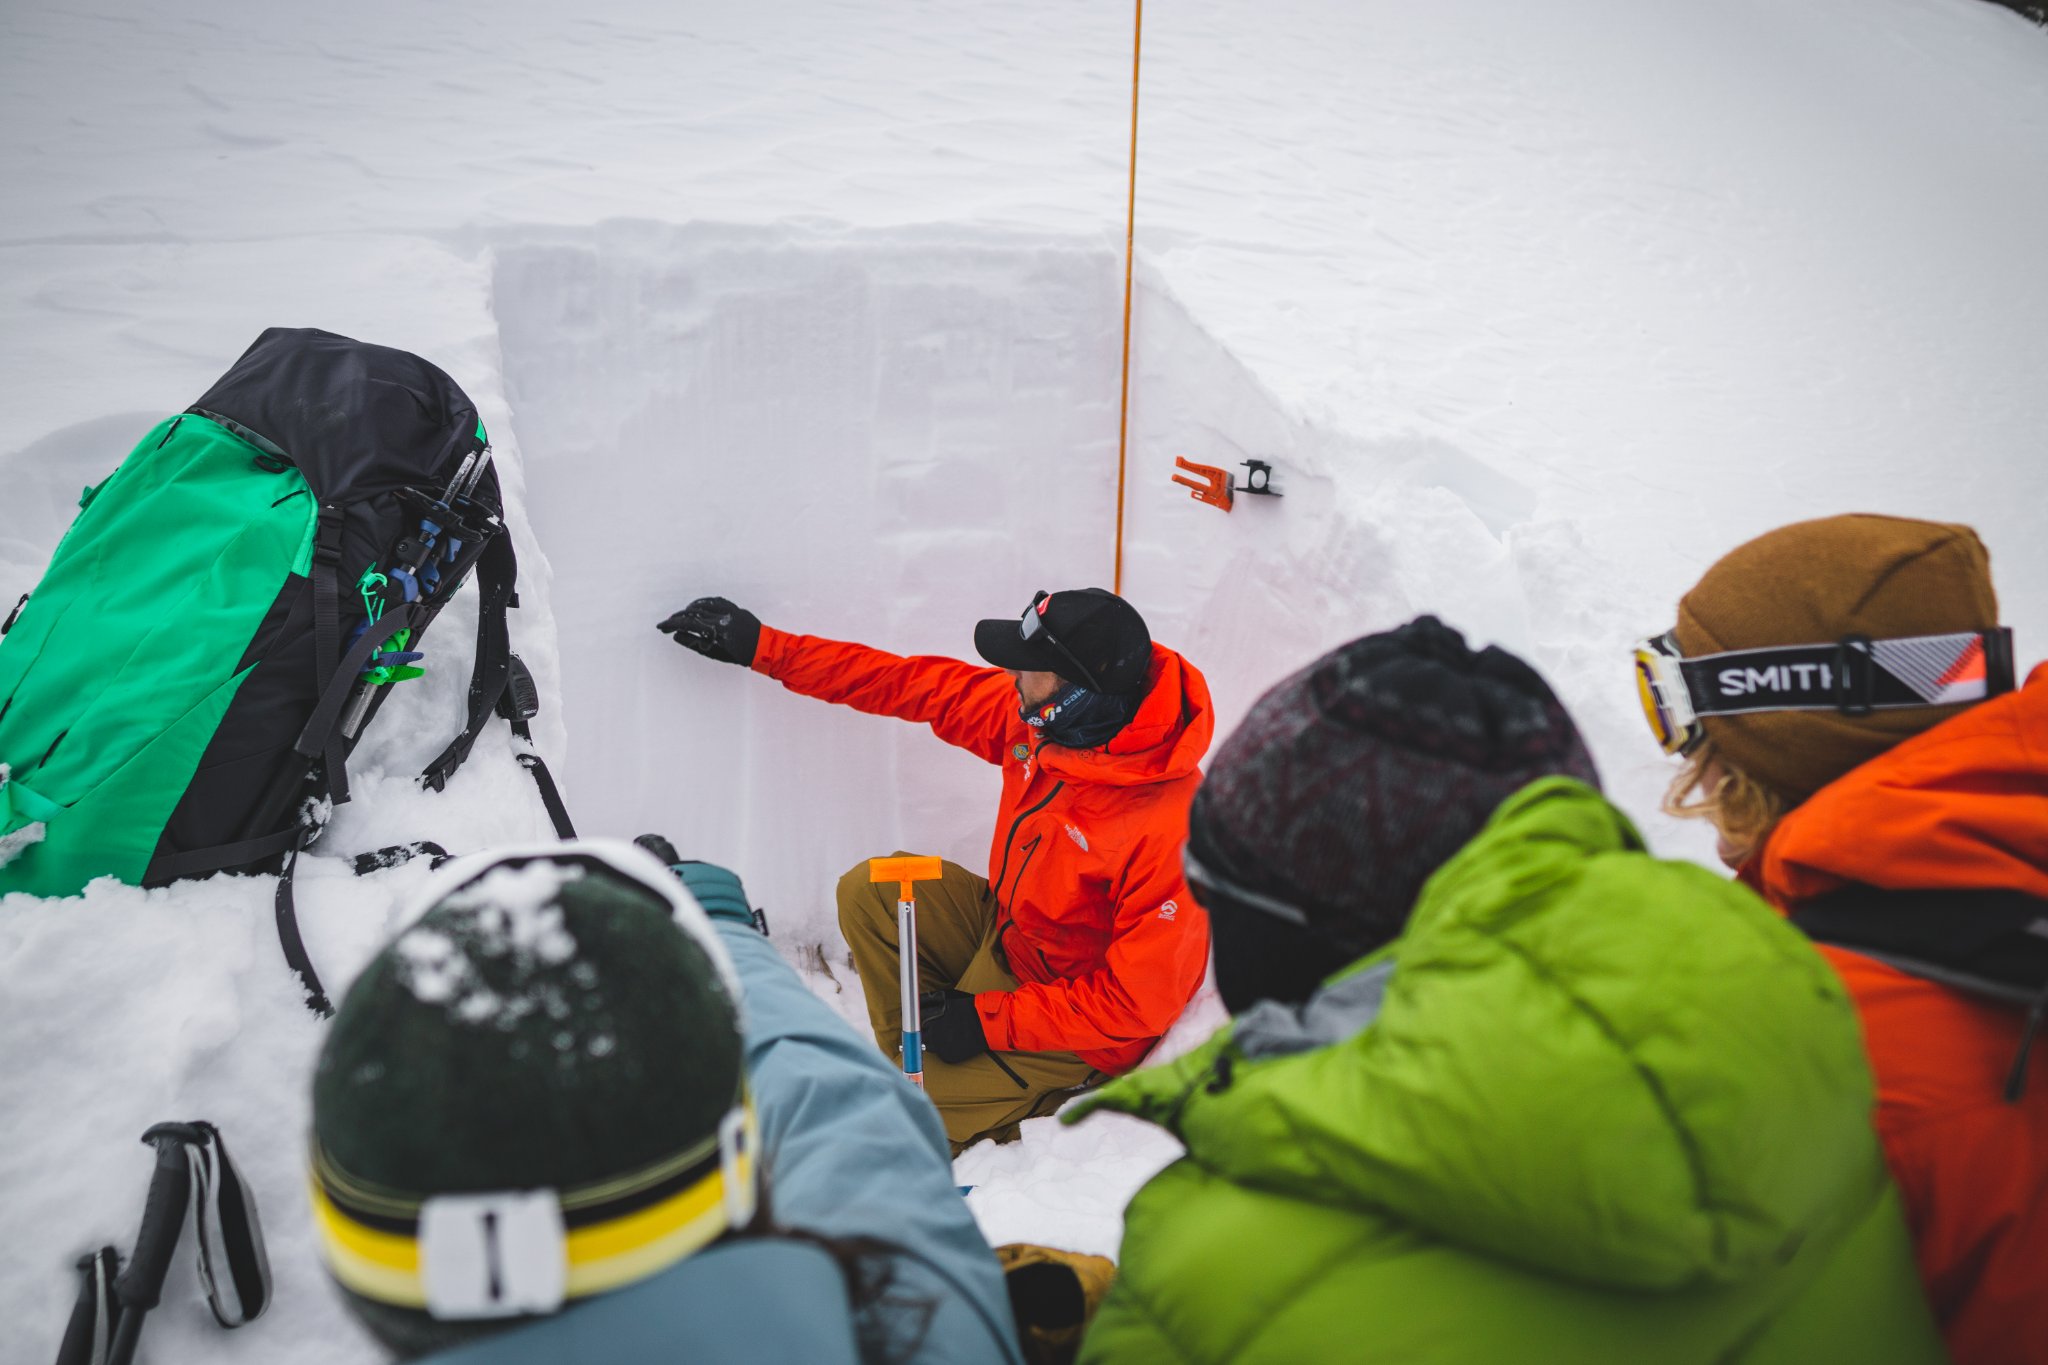 PSA Now is the Time to Sign up for an Avalanche Course